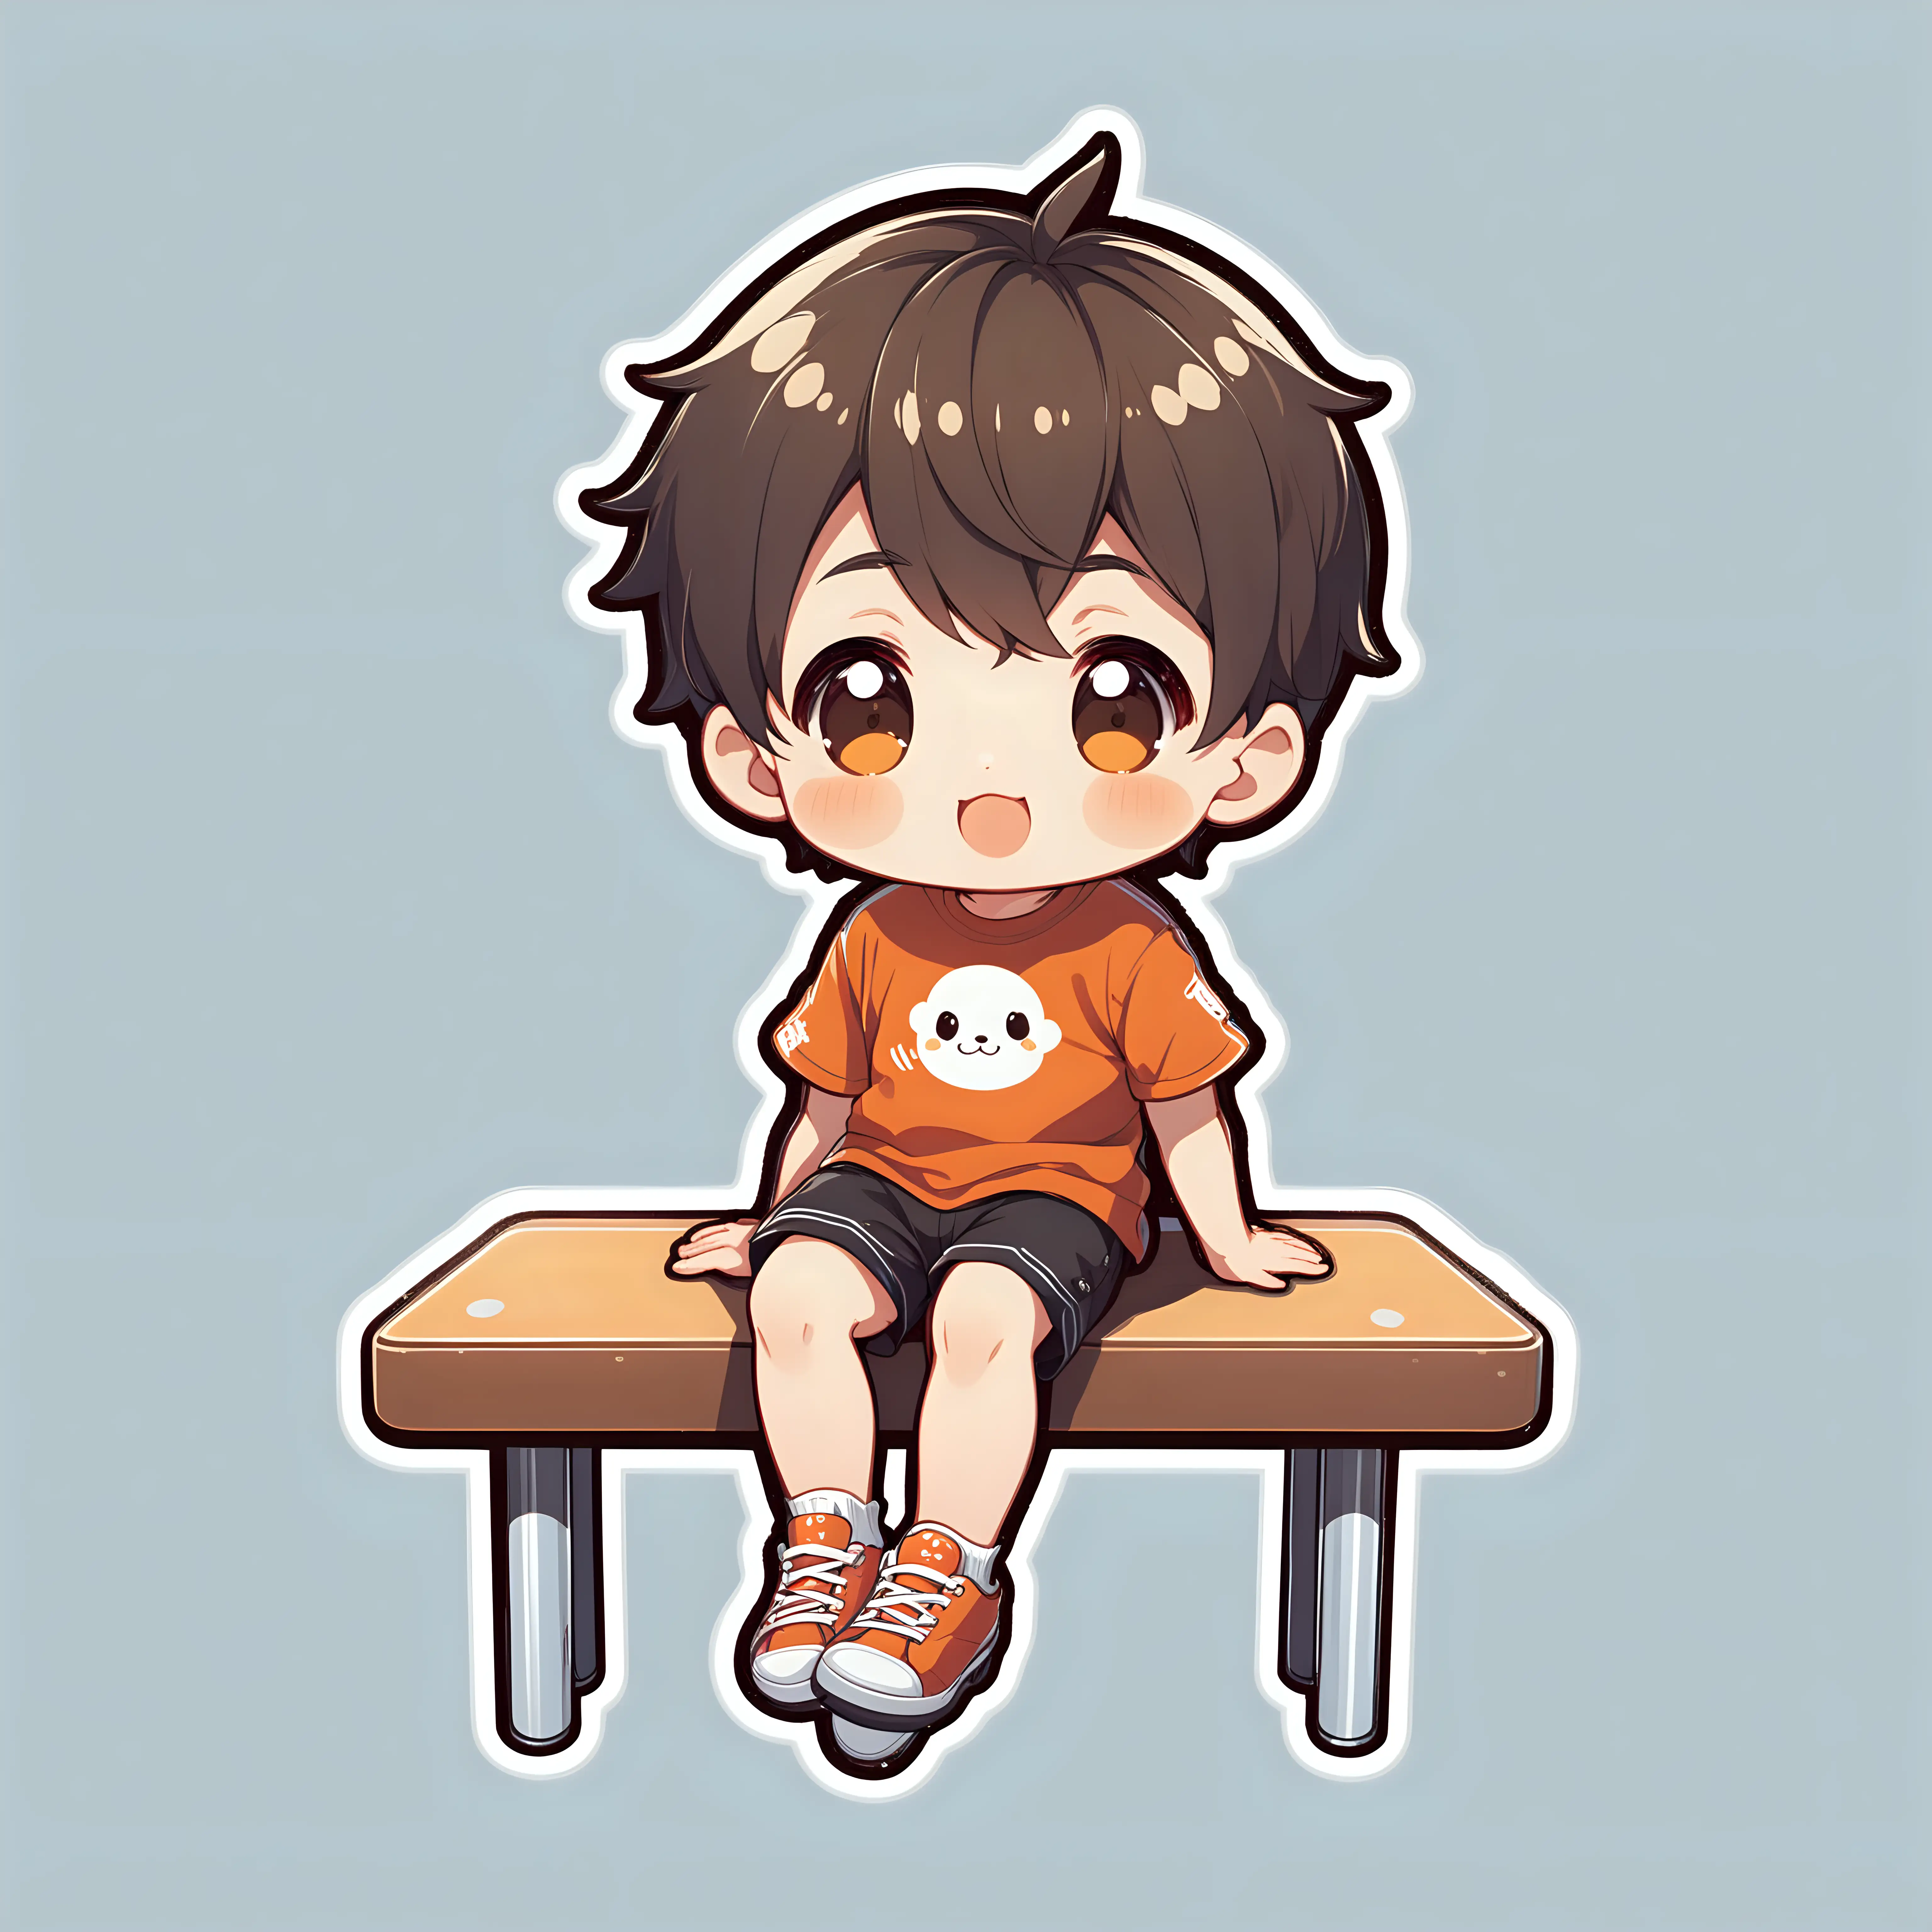 Adorable Boy Sitting on Table with Sticker on Full Display Against Clean White Background